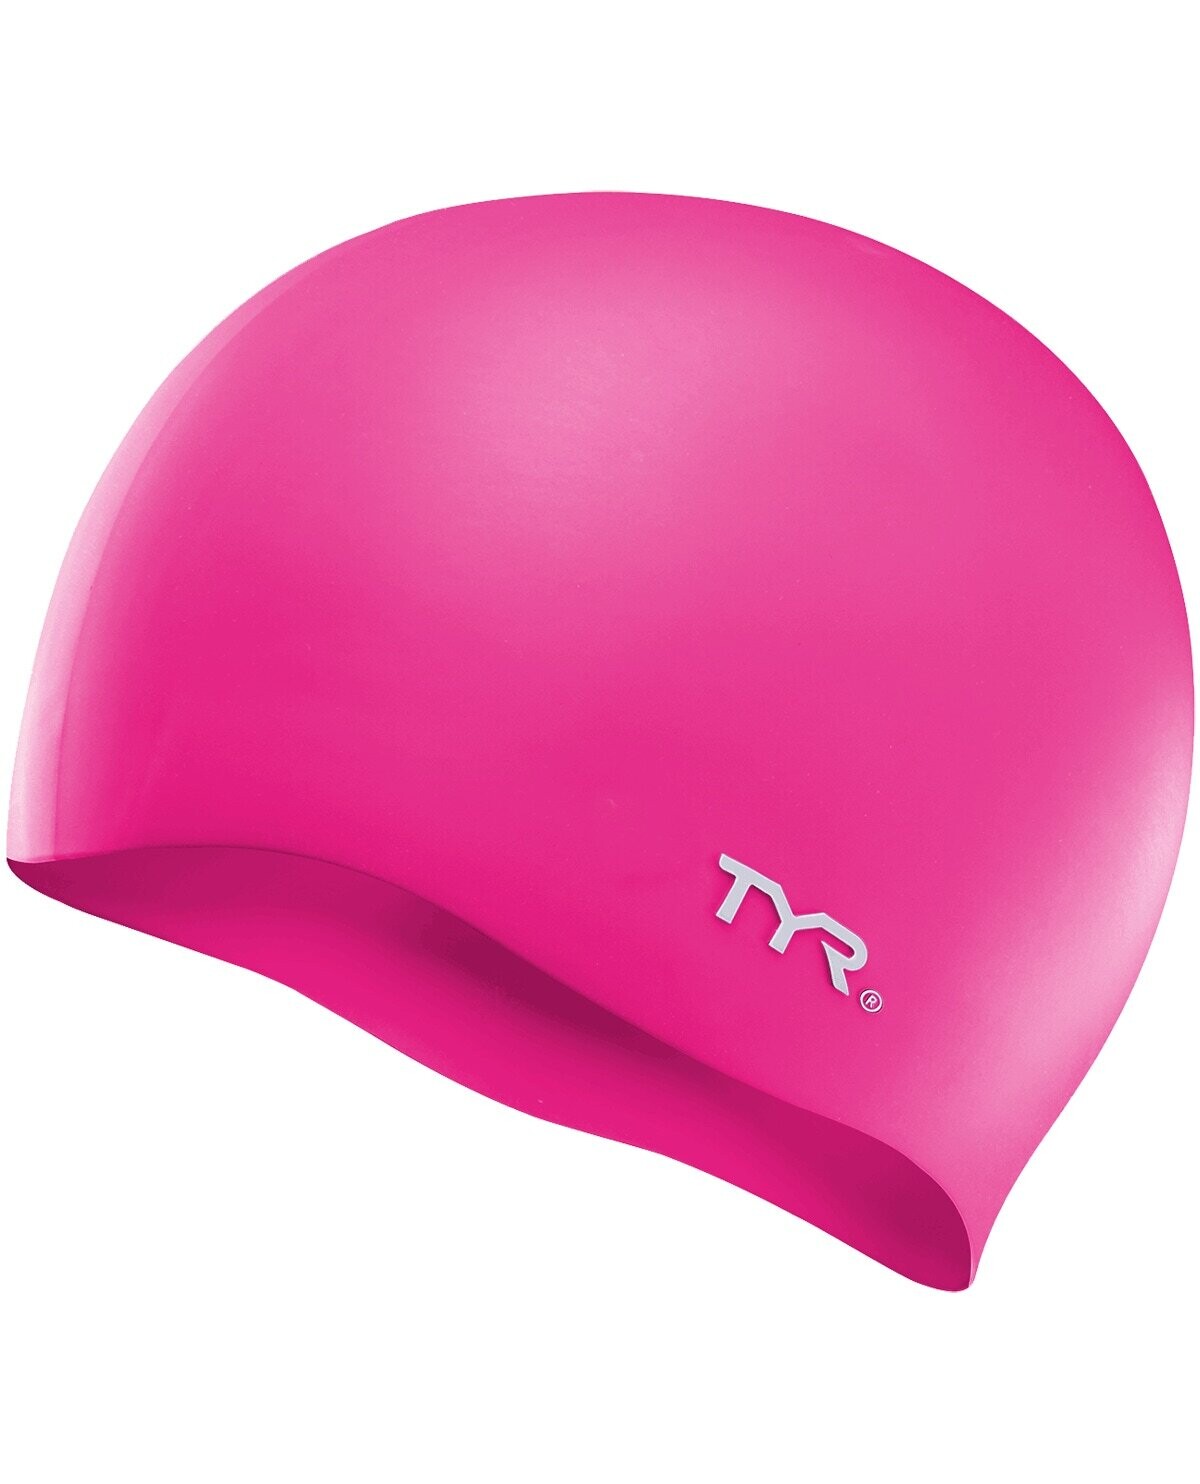 1870100 SILICONE CAP LCS PINK 693